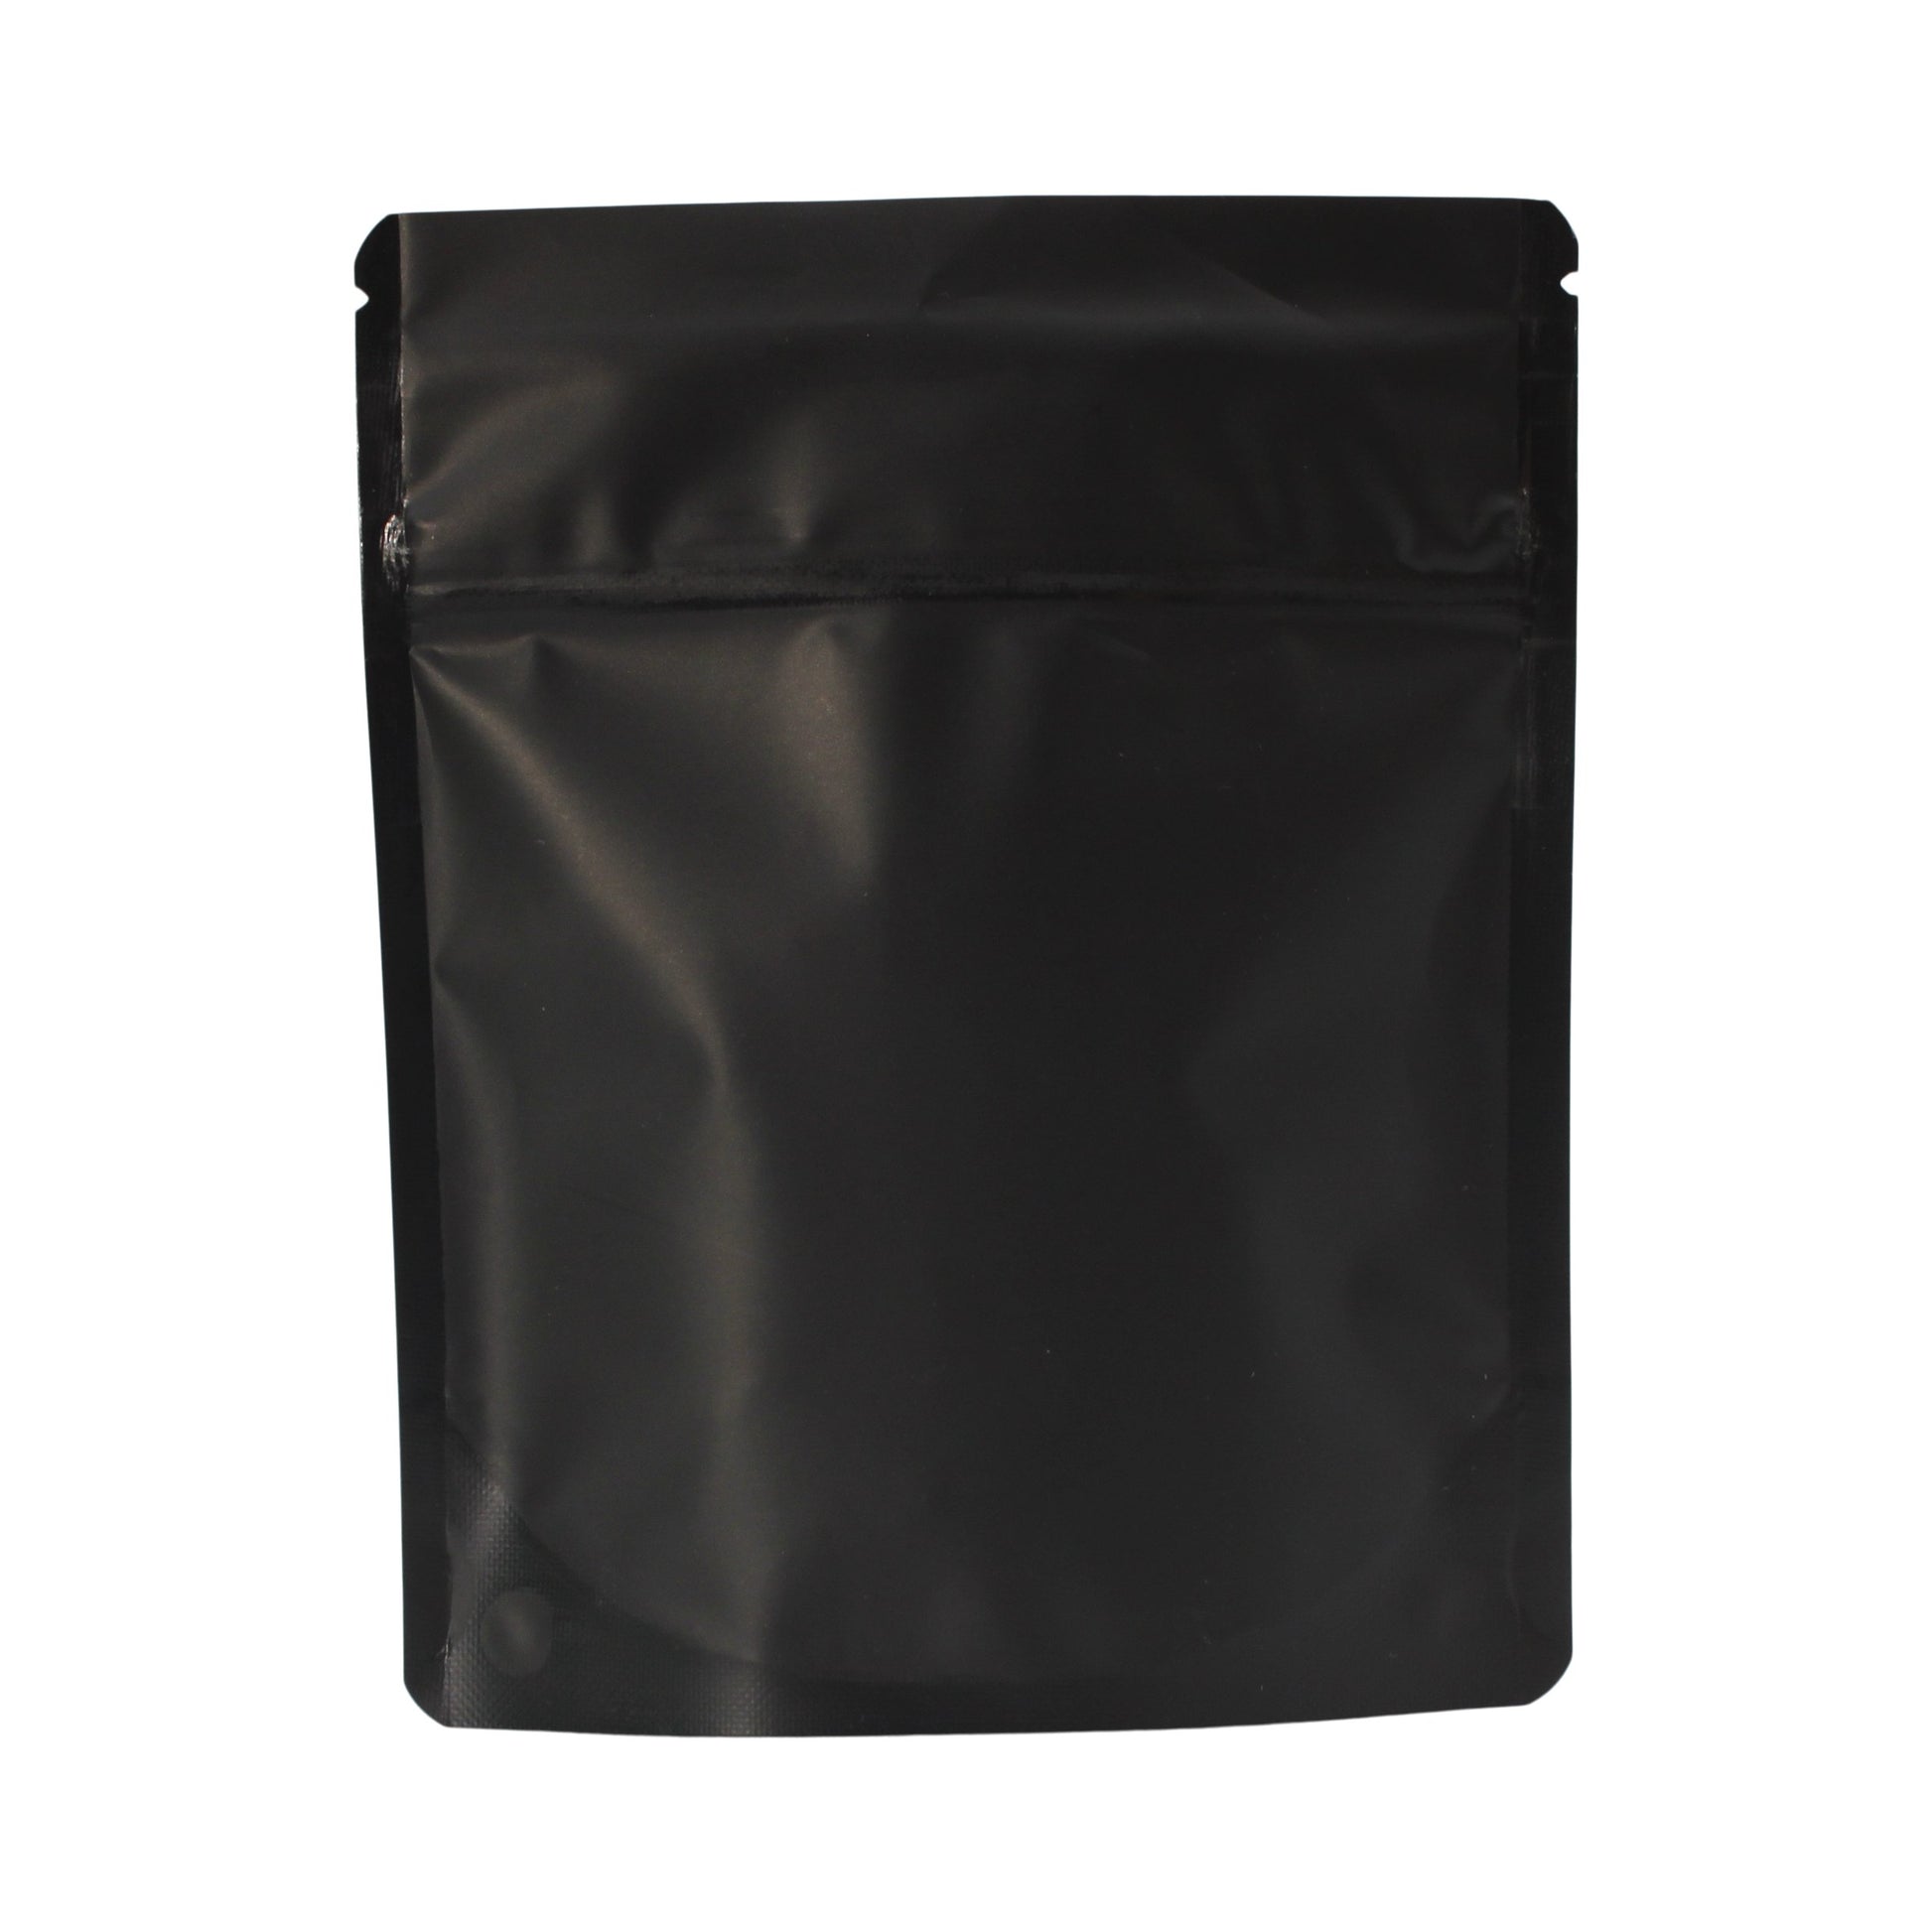 Bag King Child-Resistant Opaque Wide Mouth Bag (1/4th oz) 4.7" x 5.9"